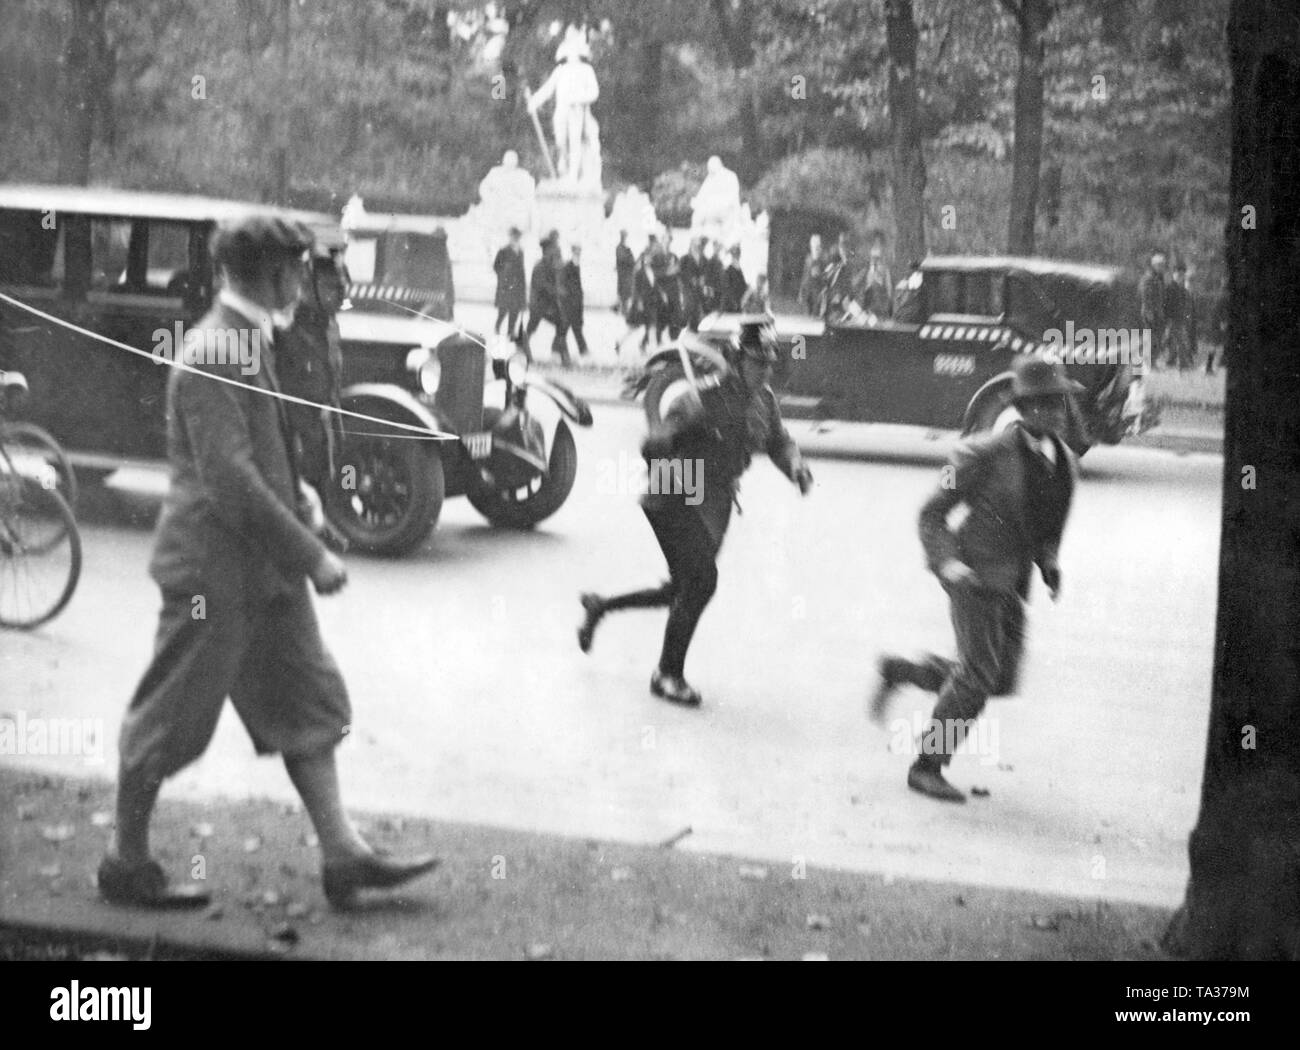 Chase of a ragger by the police on the day of the opening of the Reichstag. Stock Photo